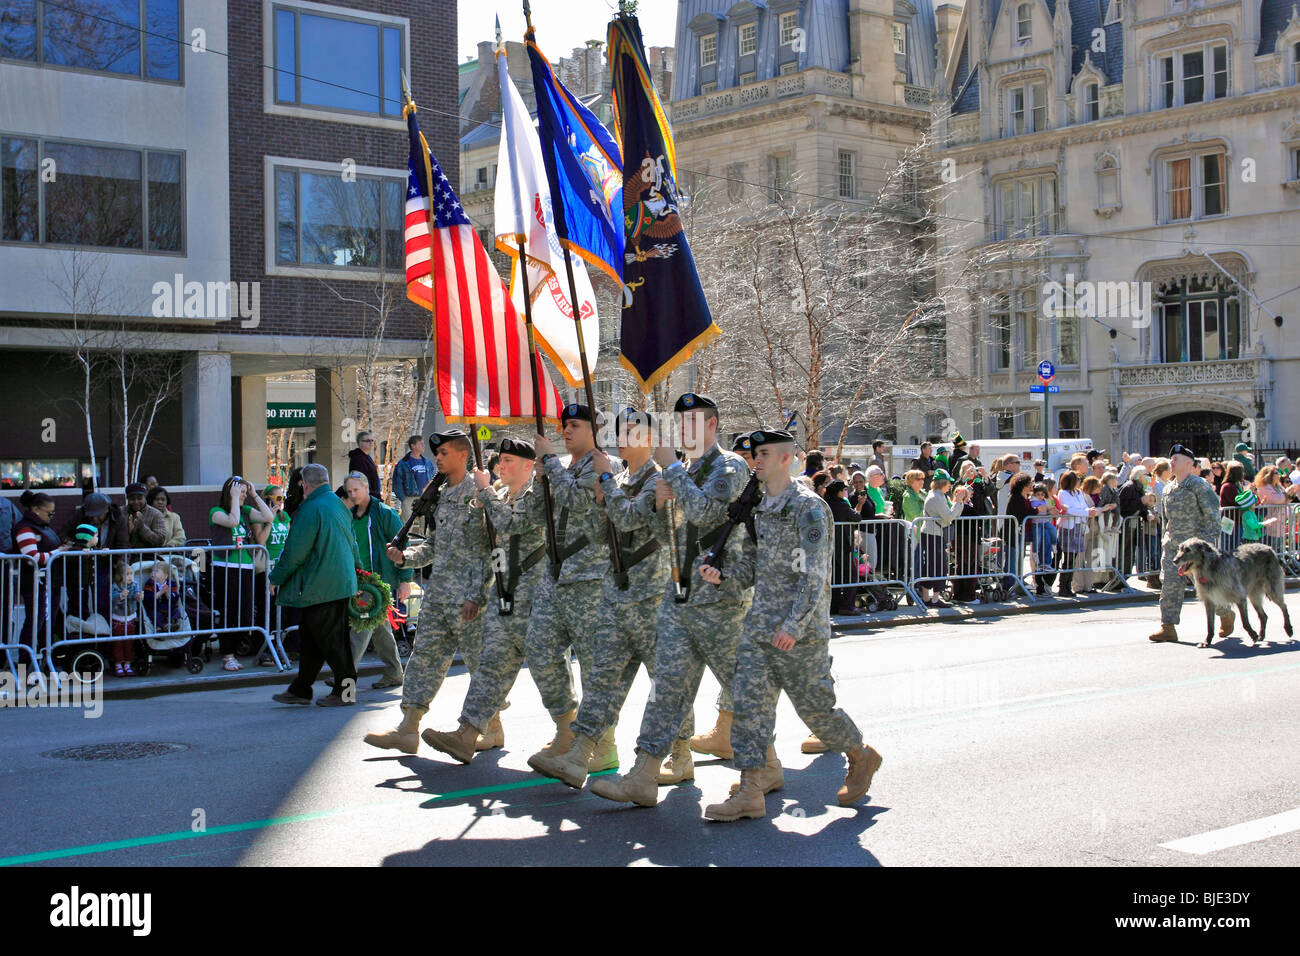 Military honor guard marches up 5th Ave. in St. Patrick's Day parade 5th Ave. Manhattan New York City Stock Photo